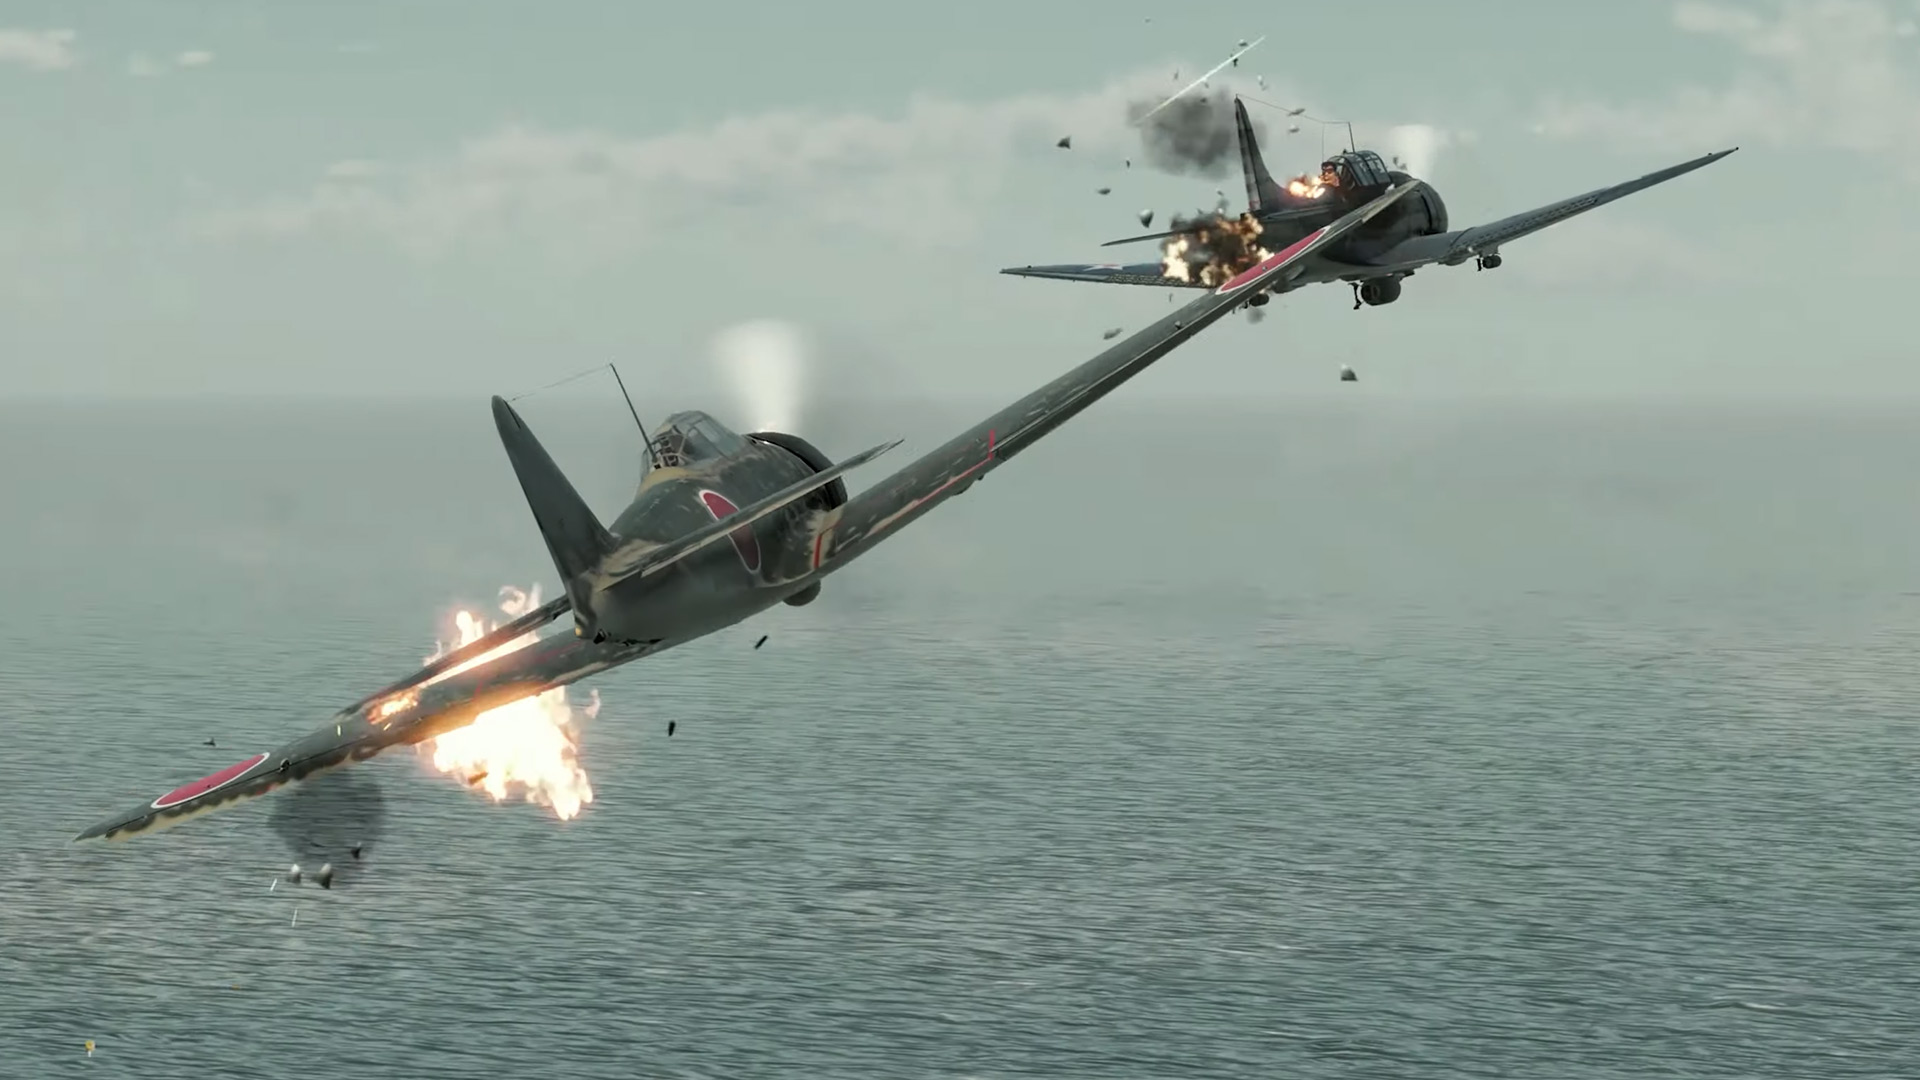 Aces of Thunder: two planes dogfighting in the sky